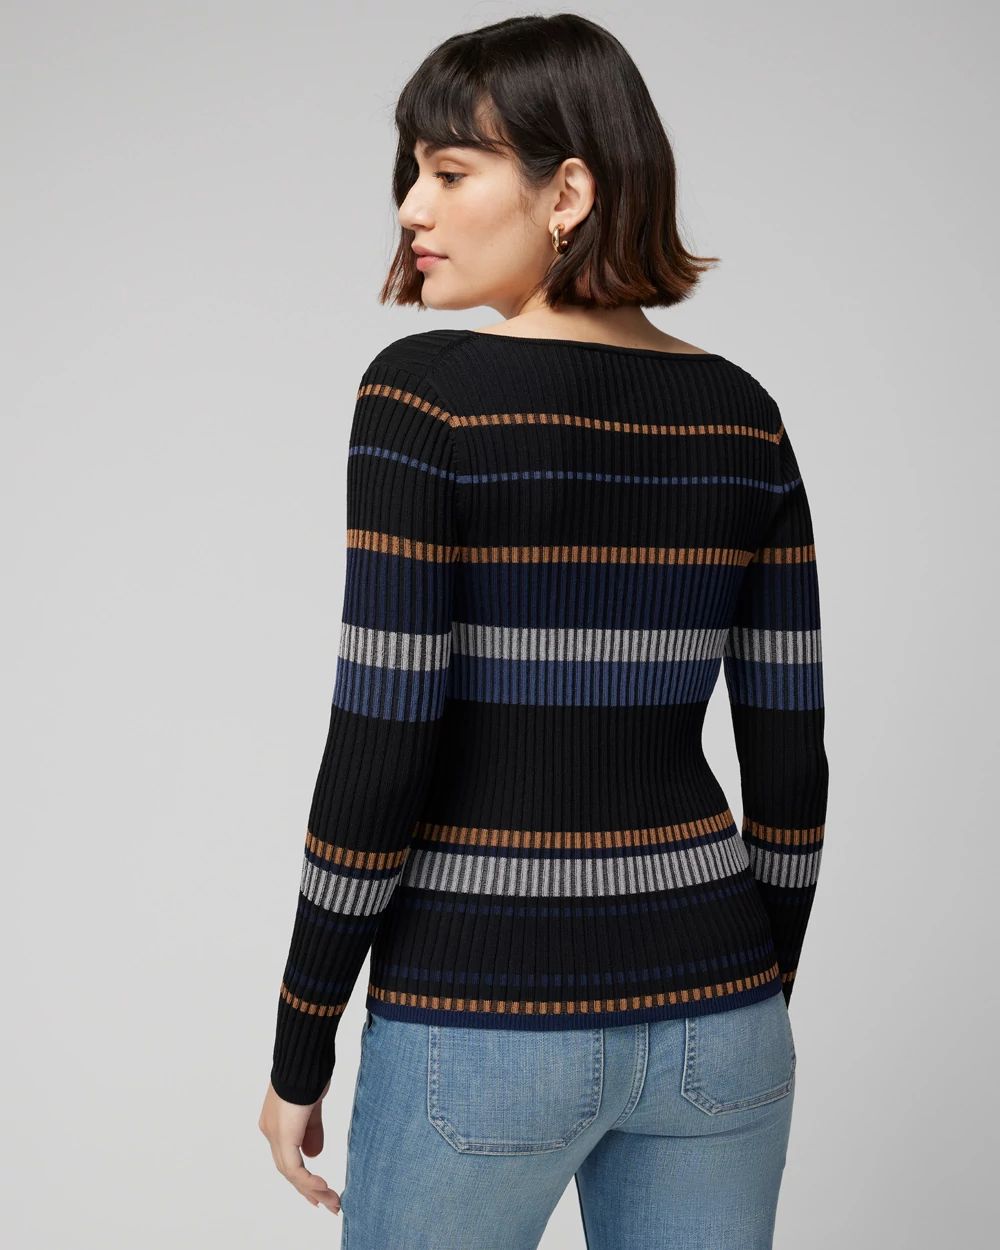 Petite Long Sleeve Stripe Keyhole Pullover Sweater click to view larger image.